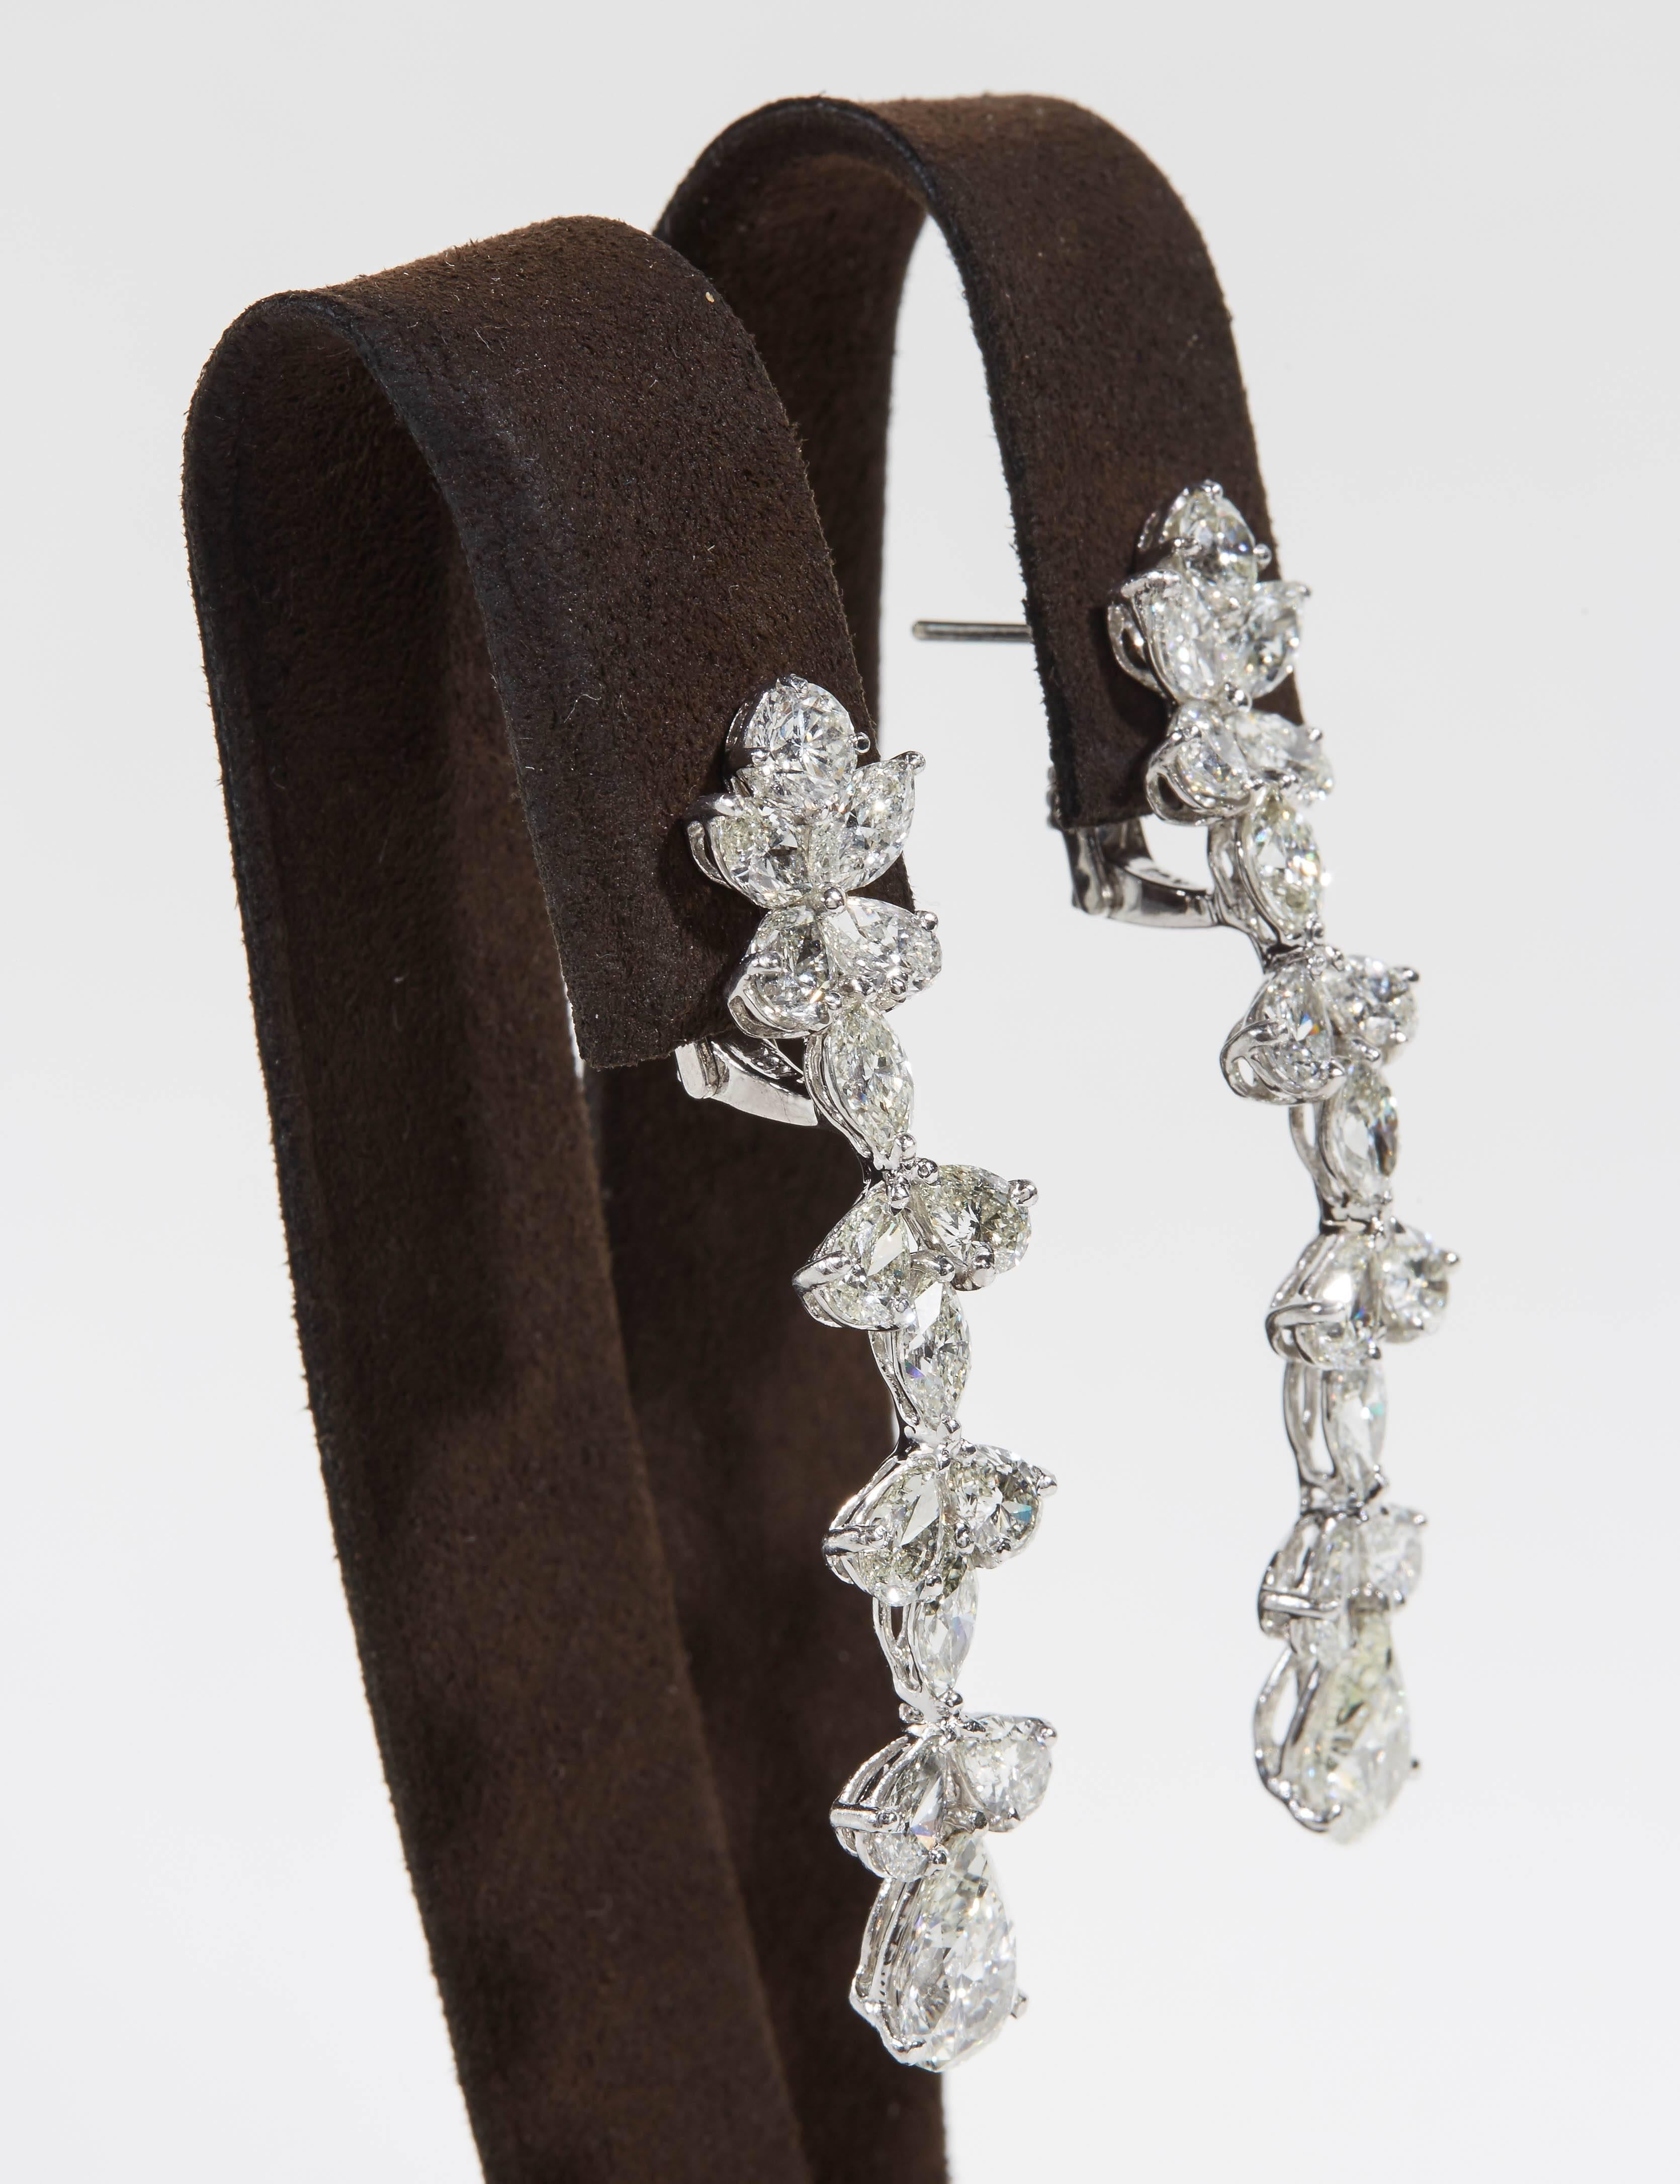 A beautiful pair of diamond dangle earrings,

1.50 carat Pear Shape drops suspended from 9.75 carats of Round, Pear and Marquise cut white diamonds.

Total diamond weight: 12.76 carats

Set in platinum

Just over 2 inches long. 

Designed to